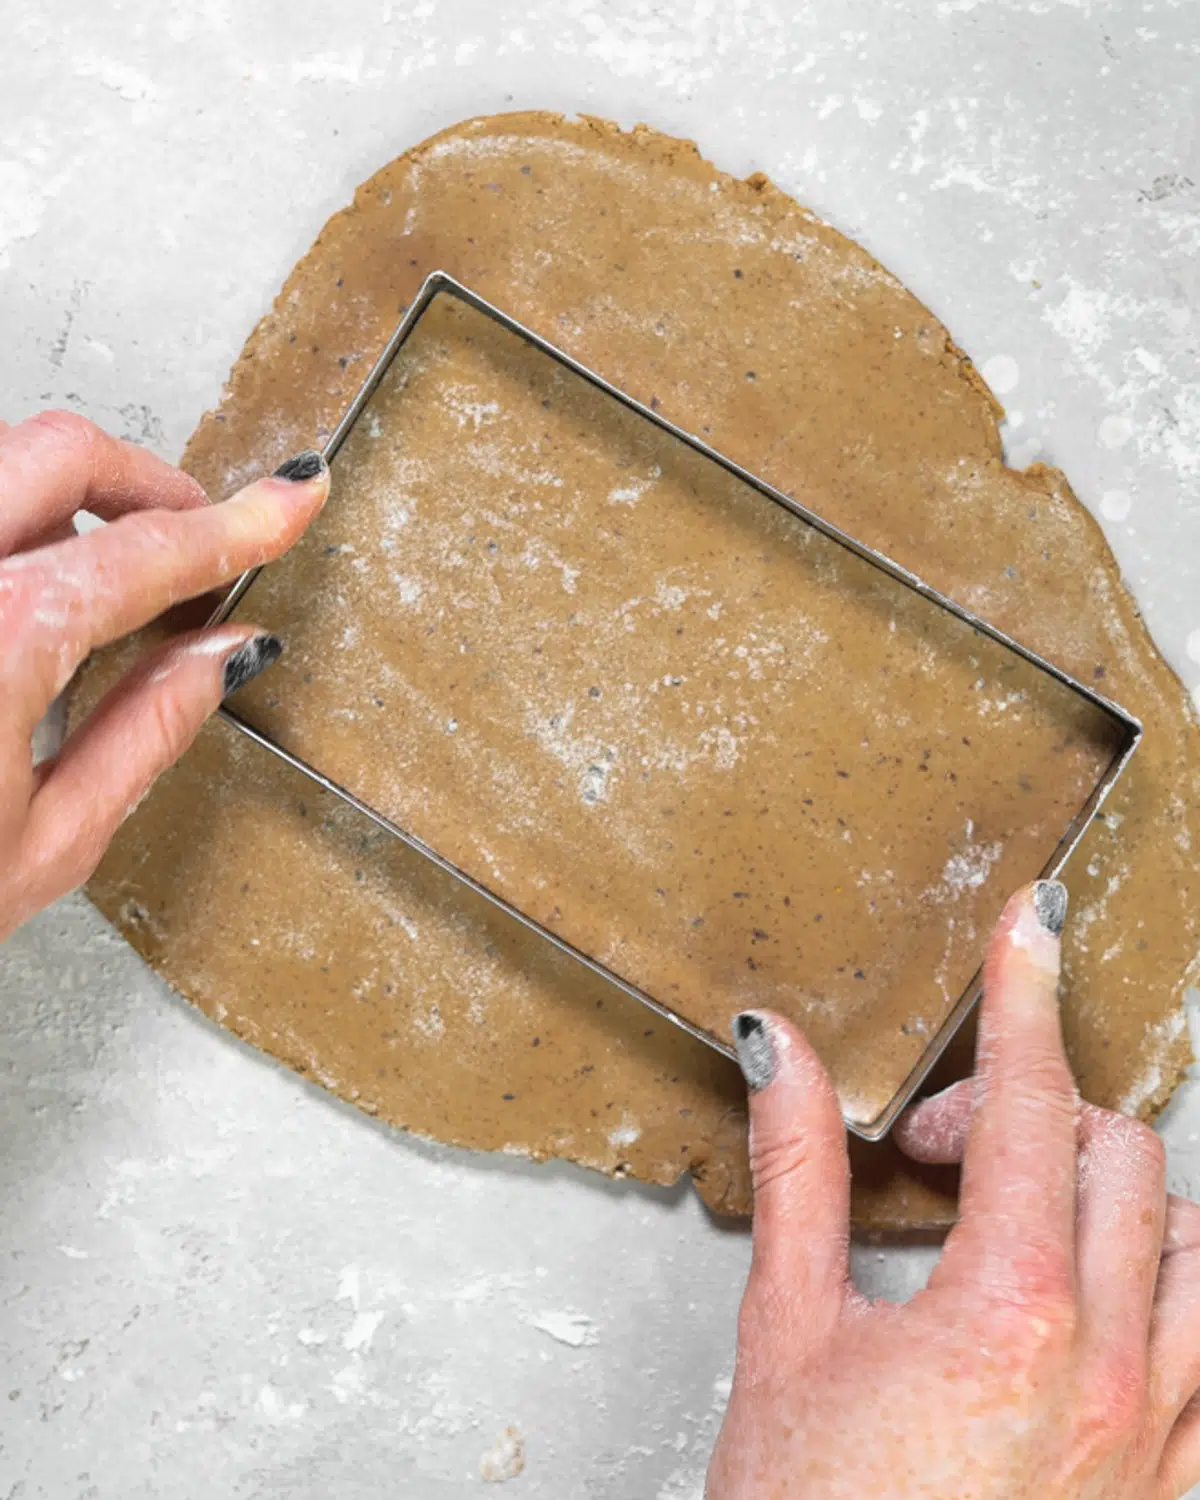 rectangular cookie cutter on top of rolled out gingerbread dough.